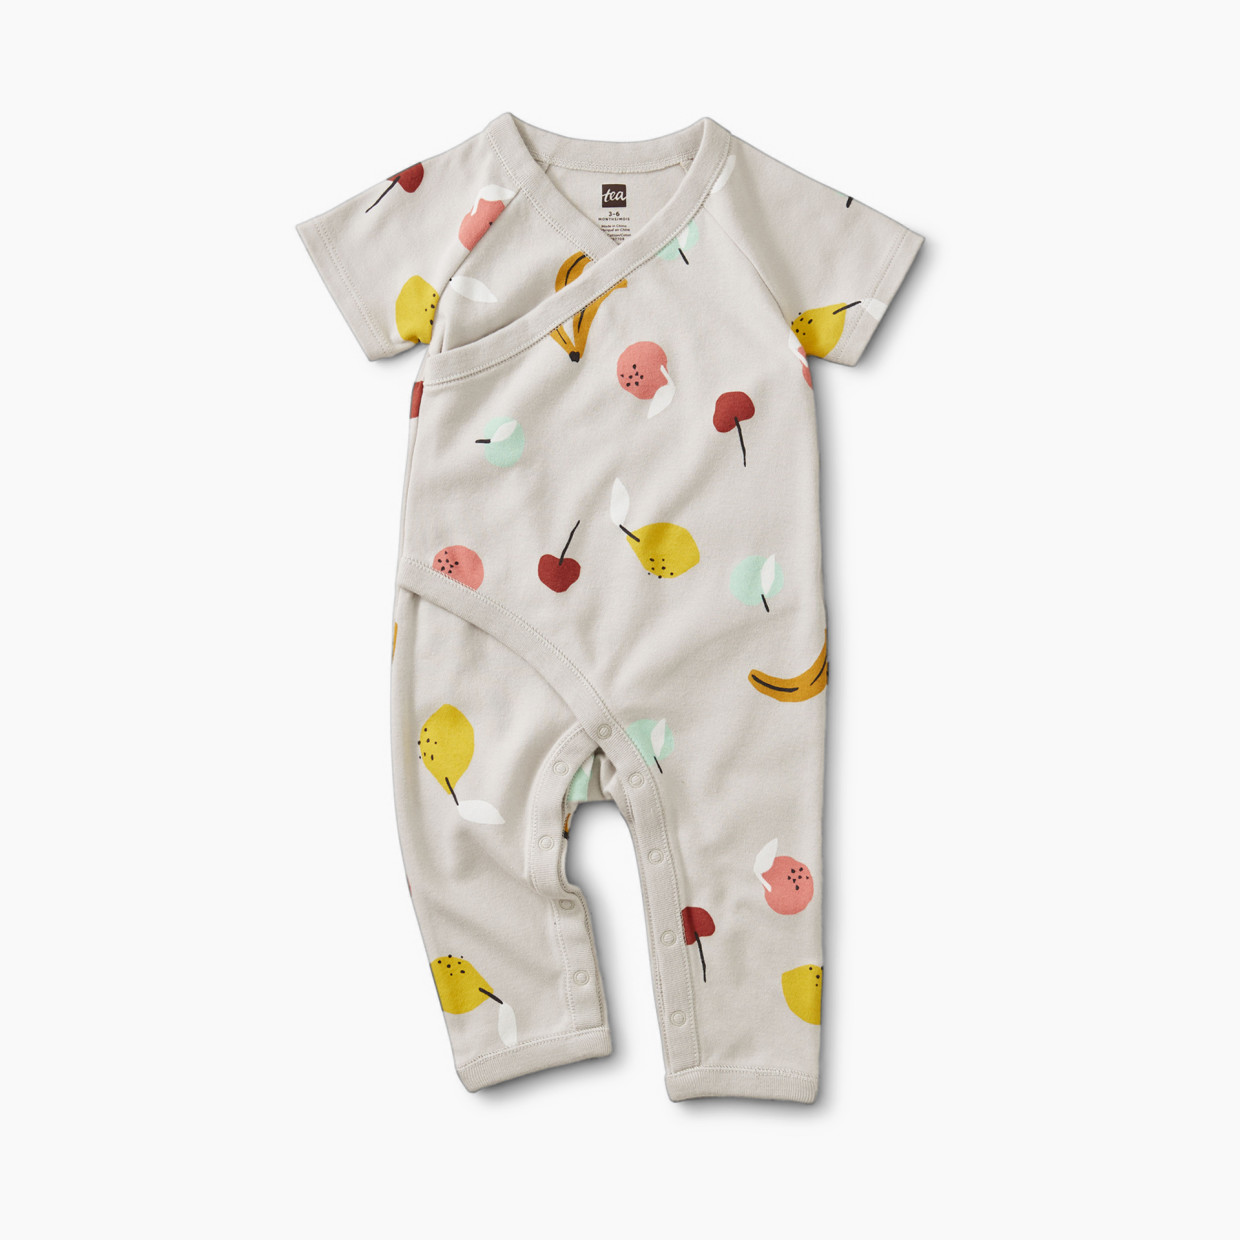 Tea Collection Wrap Baby Romper - Fruit, 0-3 Months.